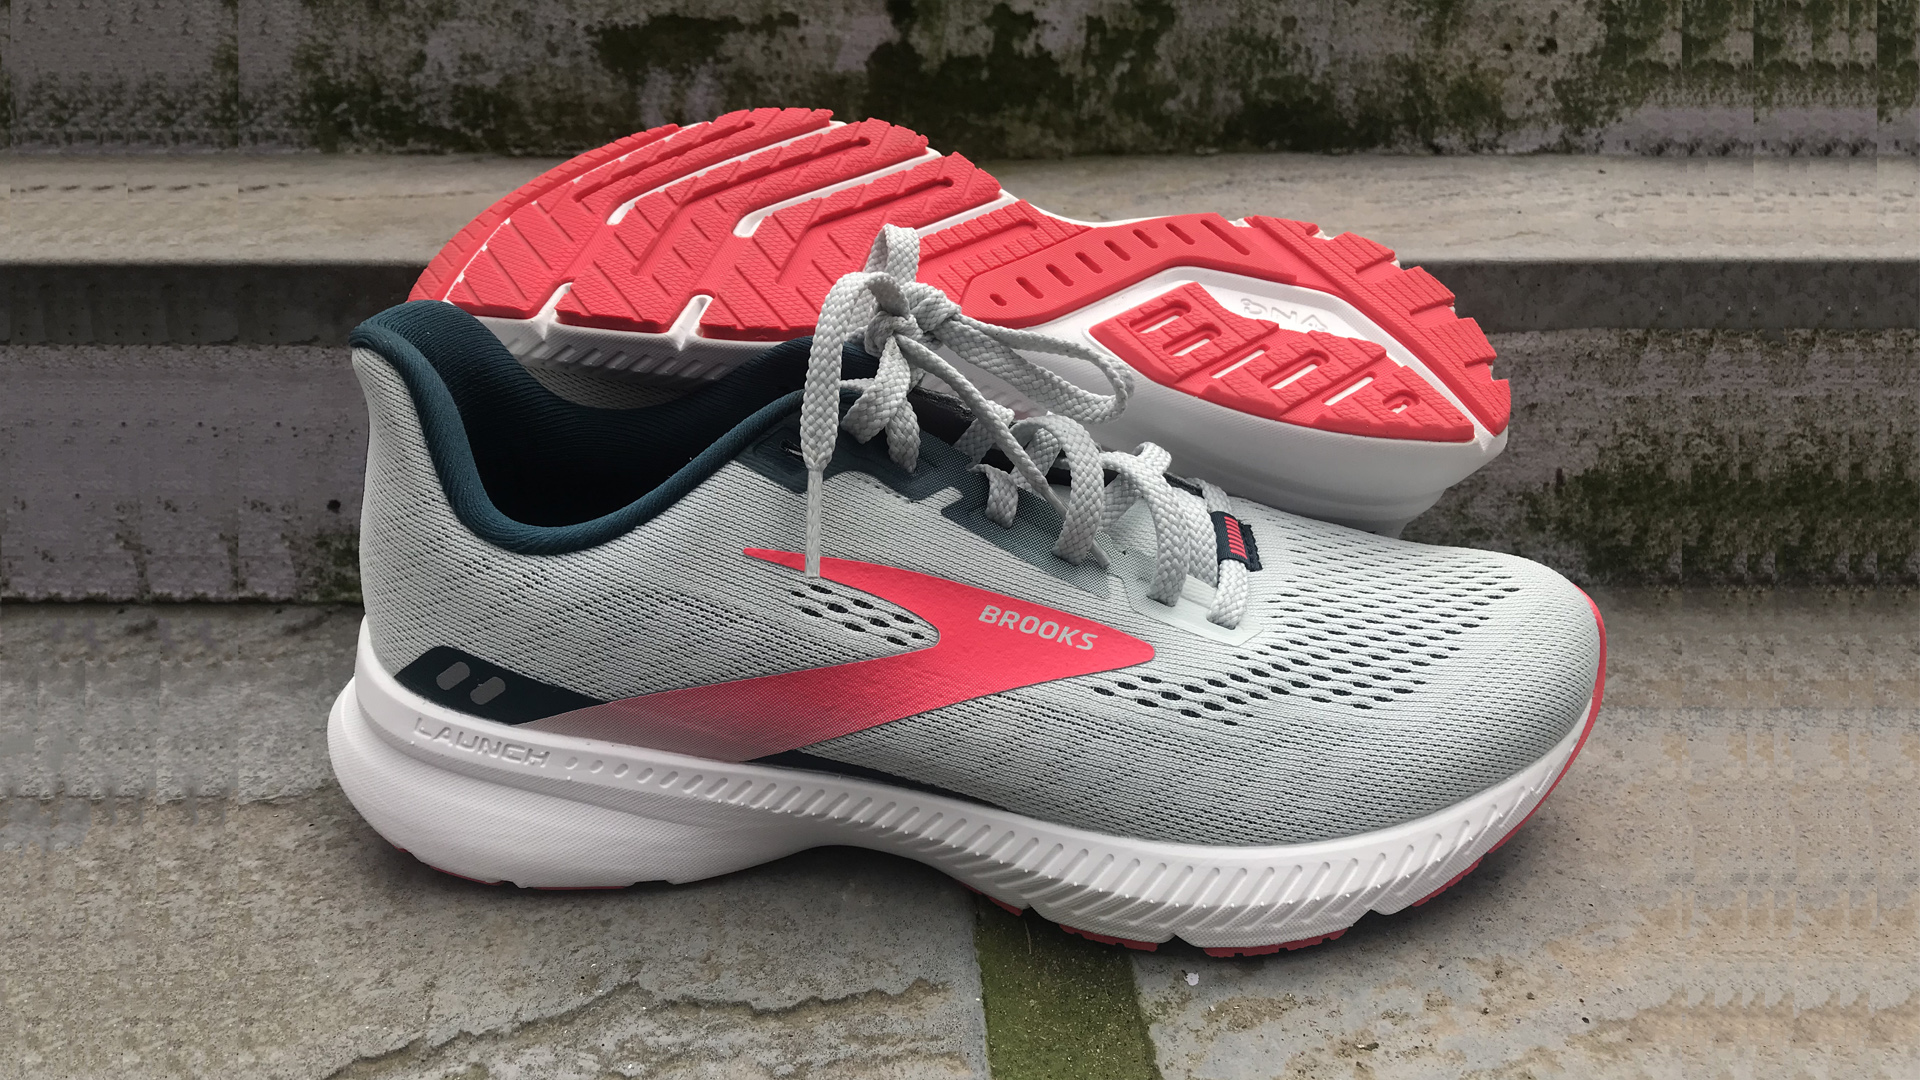 Brooks Launch 8 review: Reliable performance for a great price